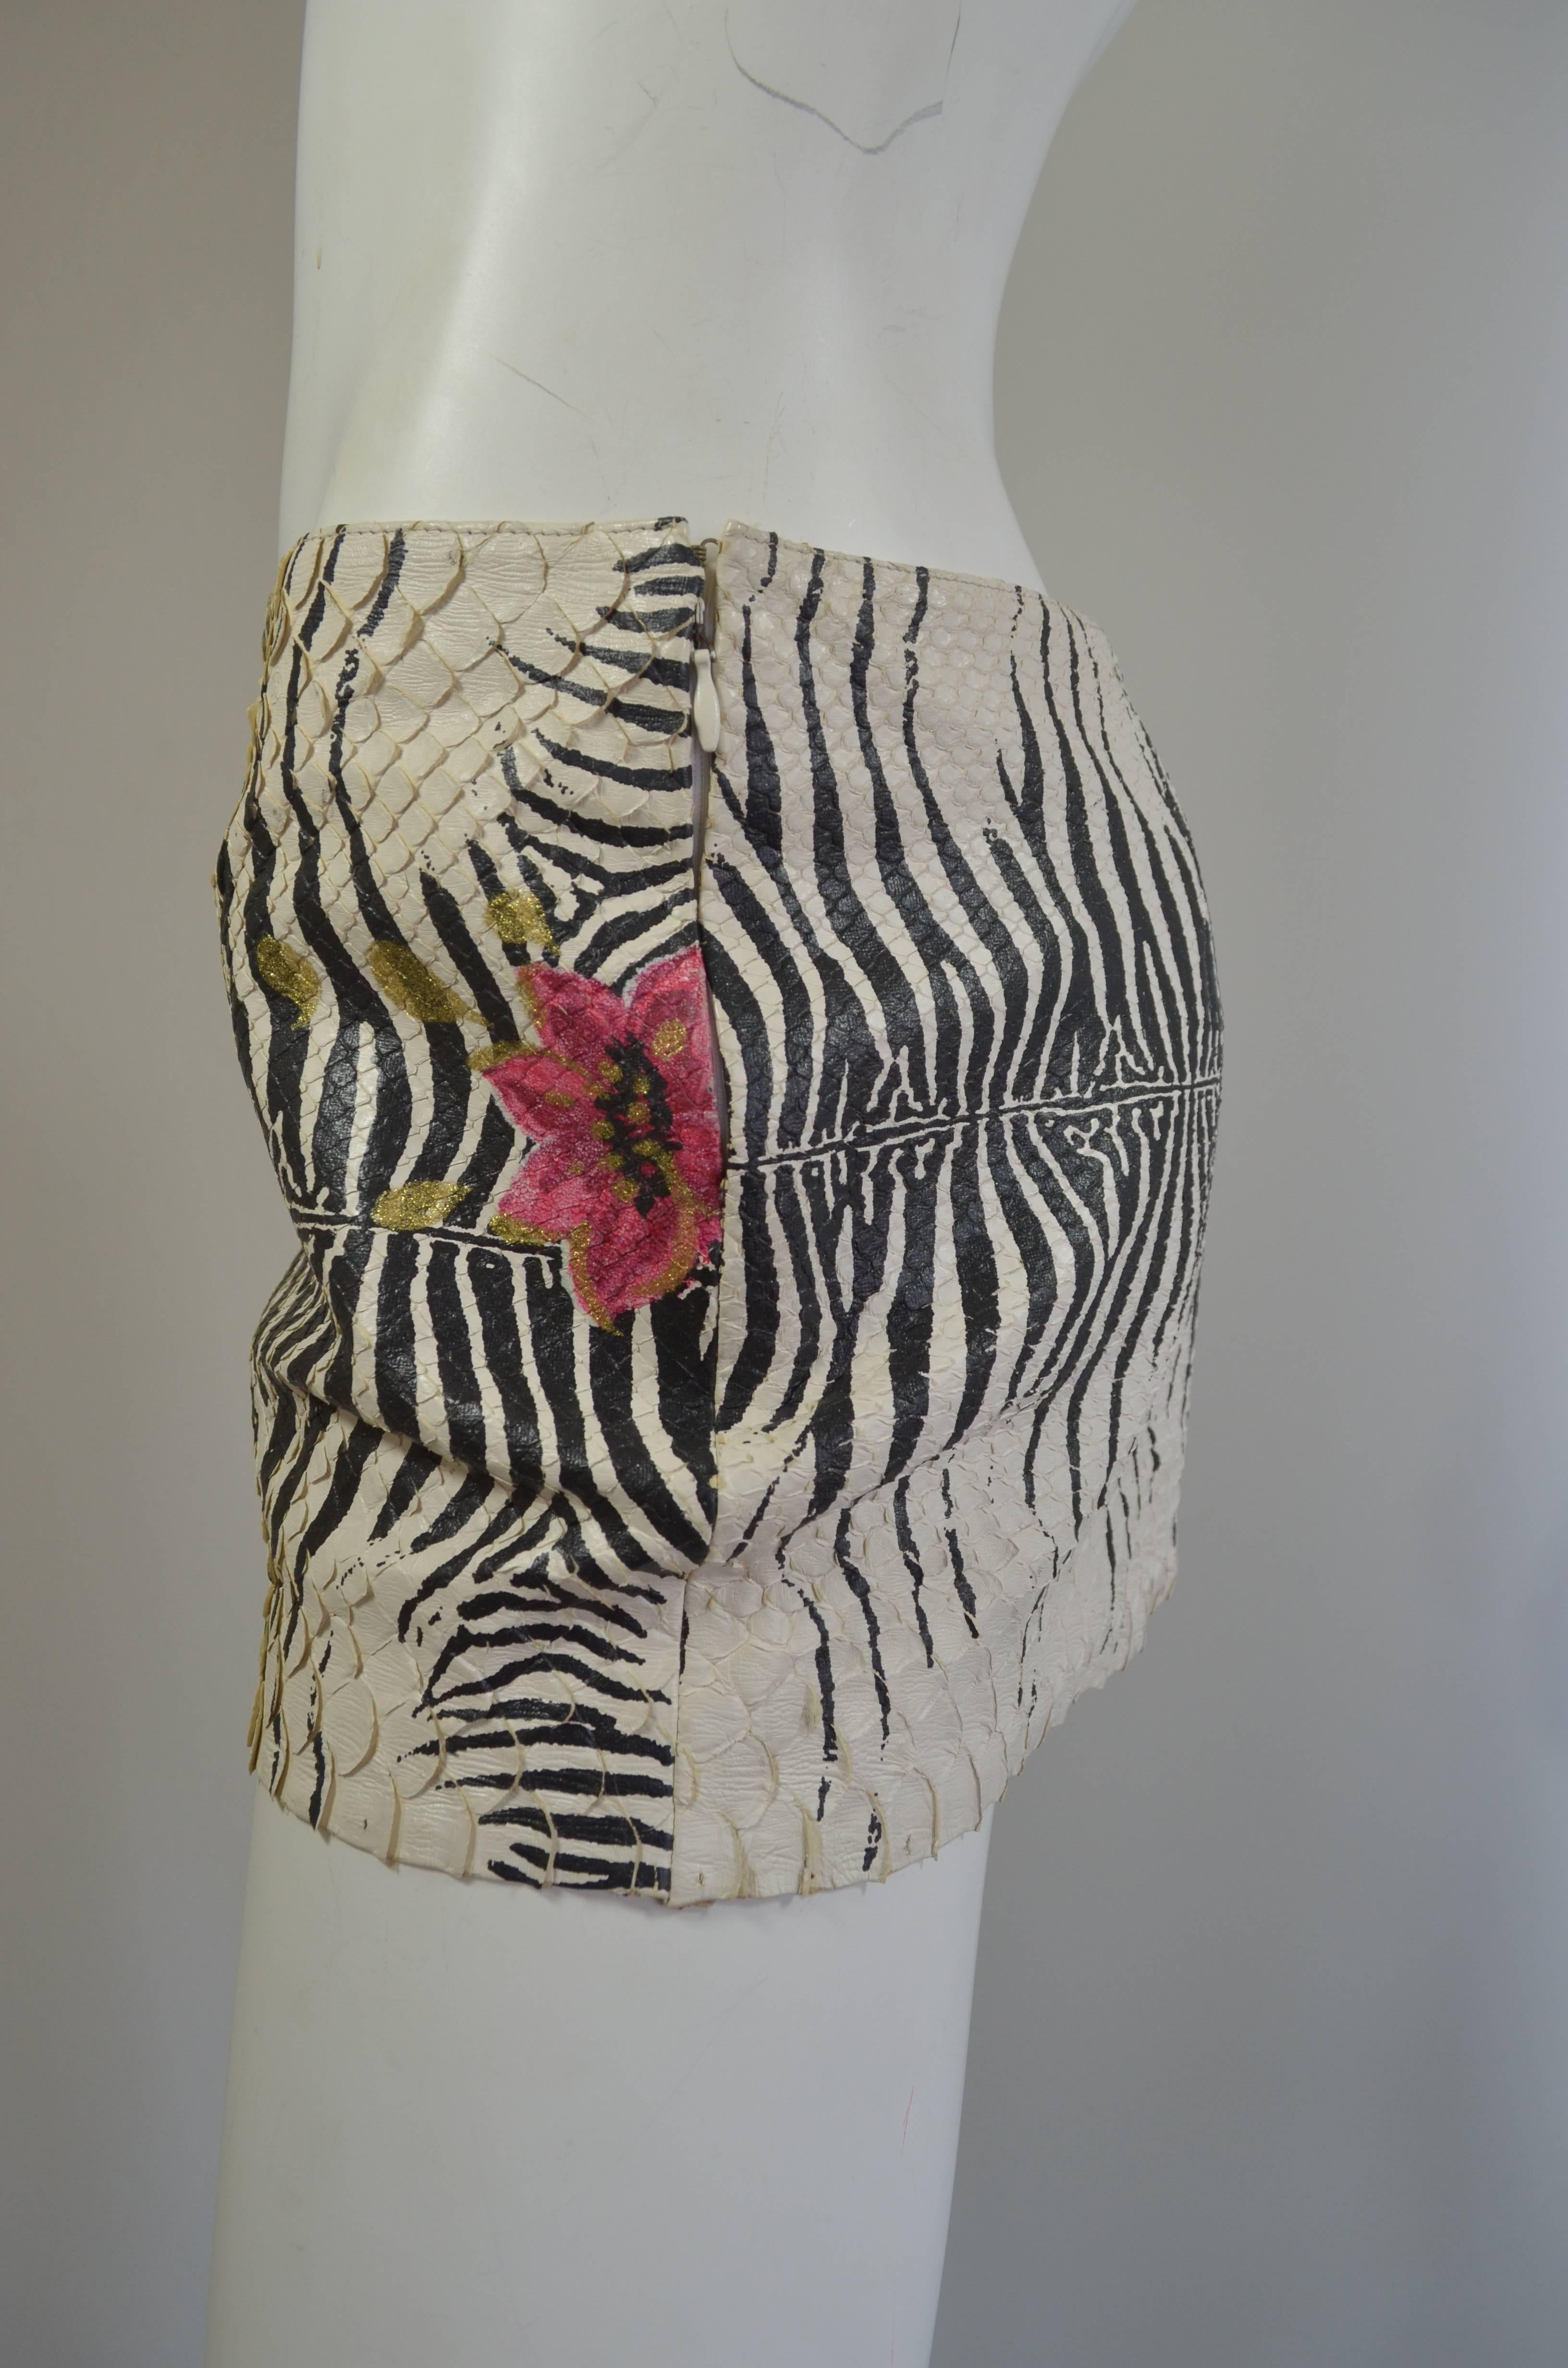 Roberto Cavalli micro mini skirt made from whitewashed French genuine snakeskin with black zebra design, and pink and gold camellias painted on the skin. Lined in signature Roberto Cavalli satin lining. Side zipper. Made in Italy. Excellent